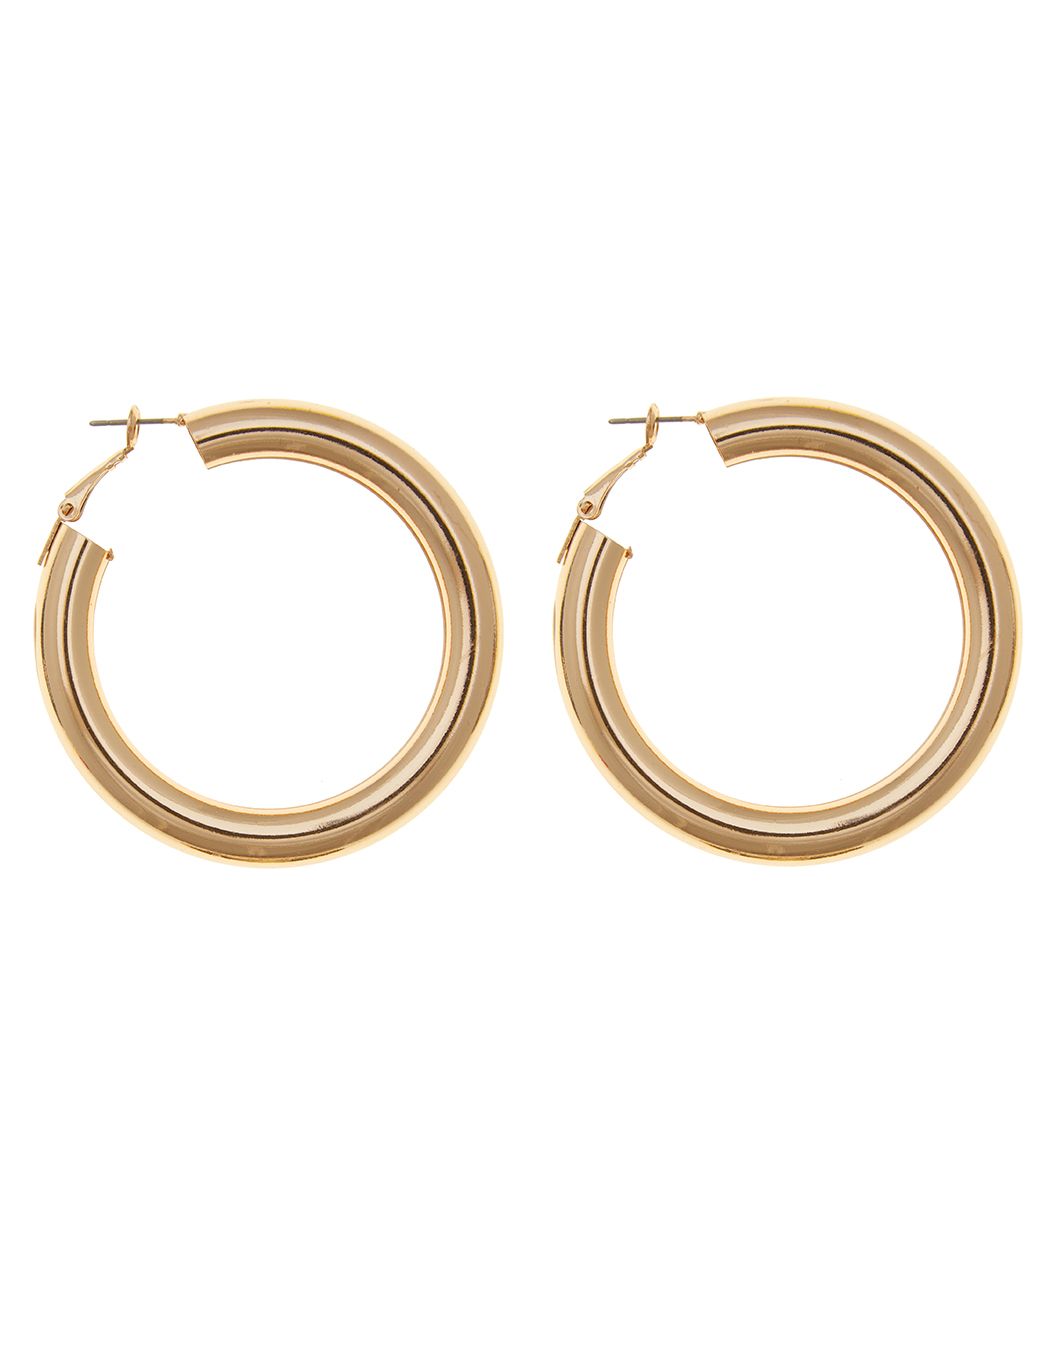 Oversized Rounded Hoop Earrings | Women's Plus Size Jewelry | ELOQUII | Eloquii